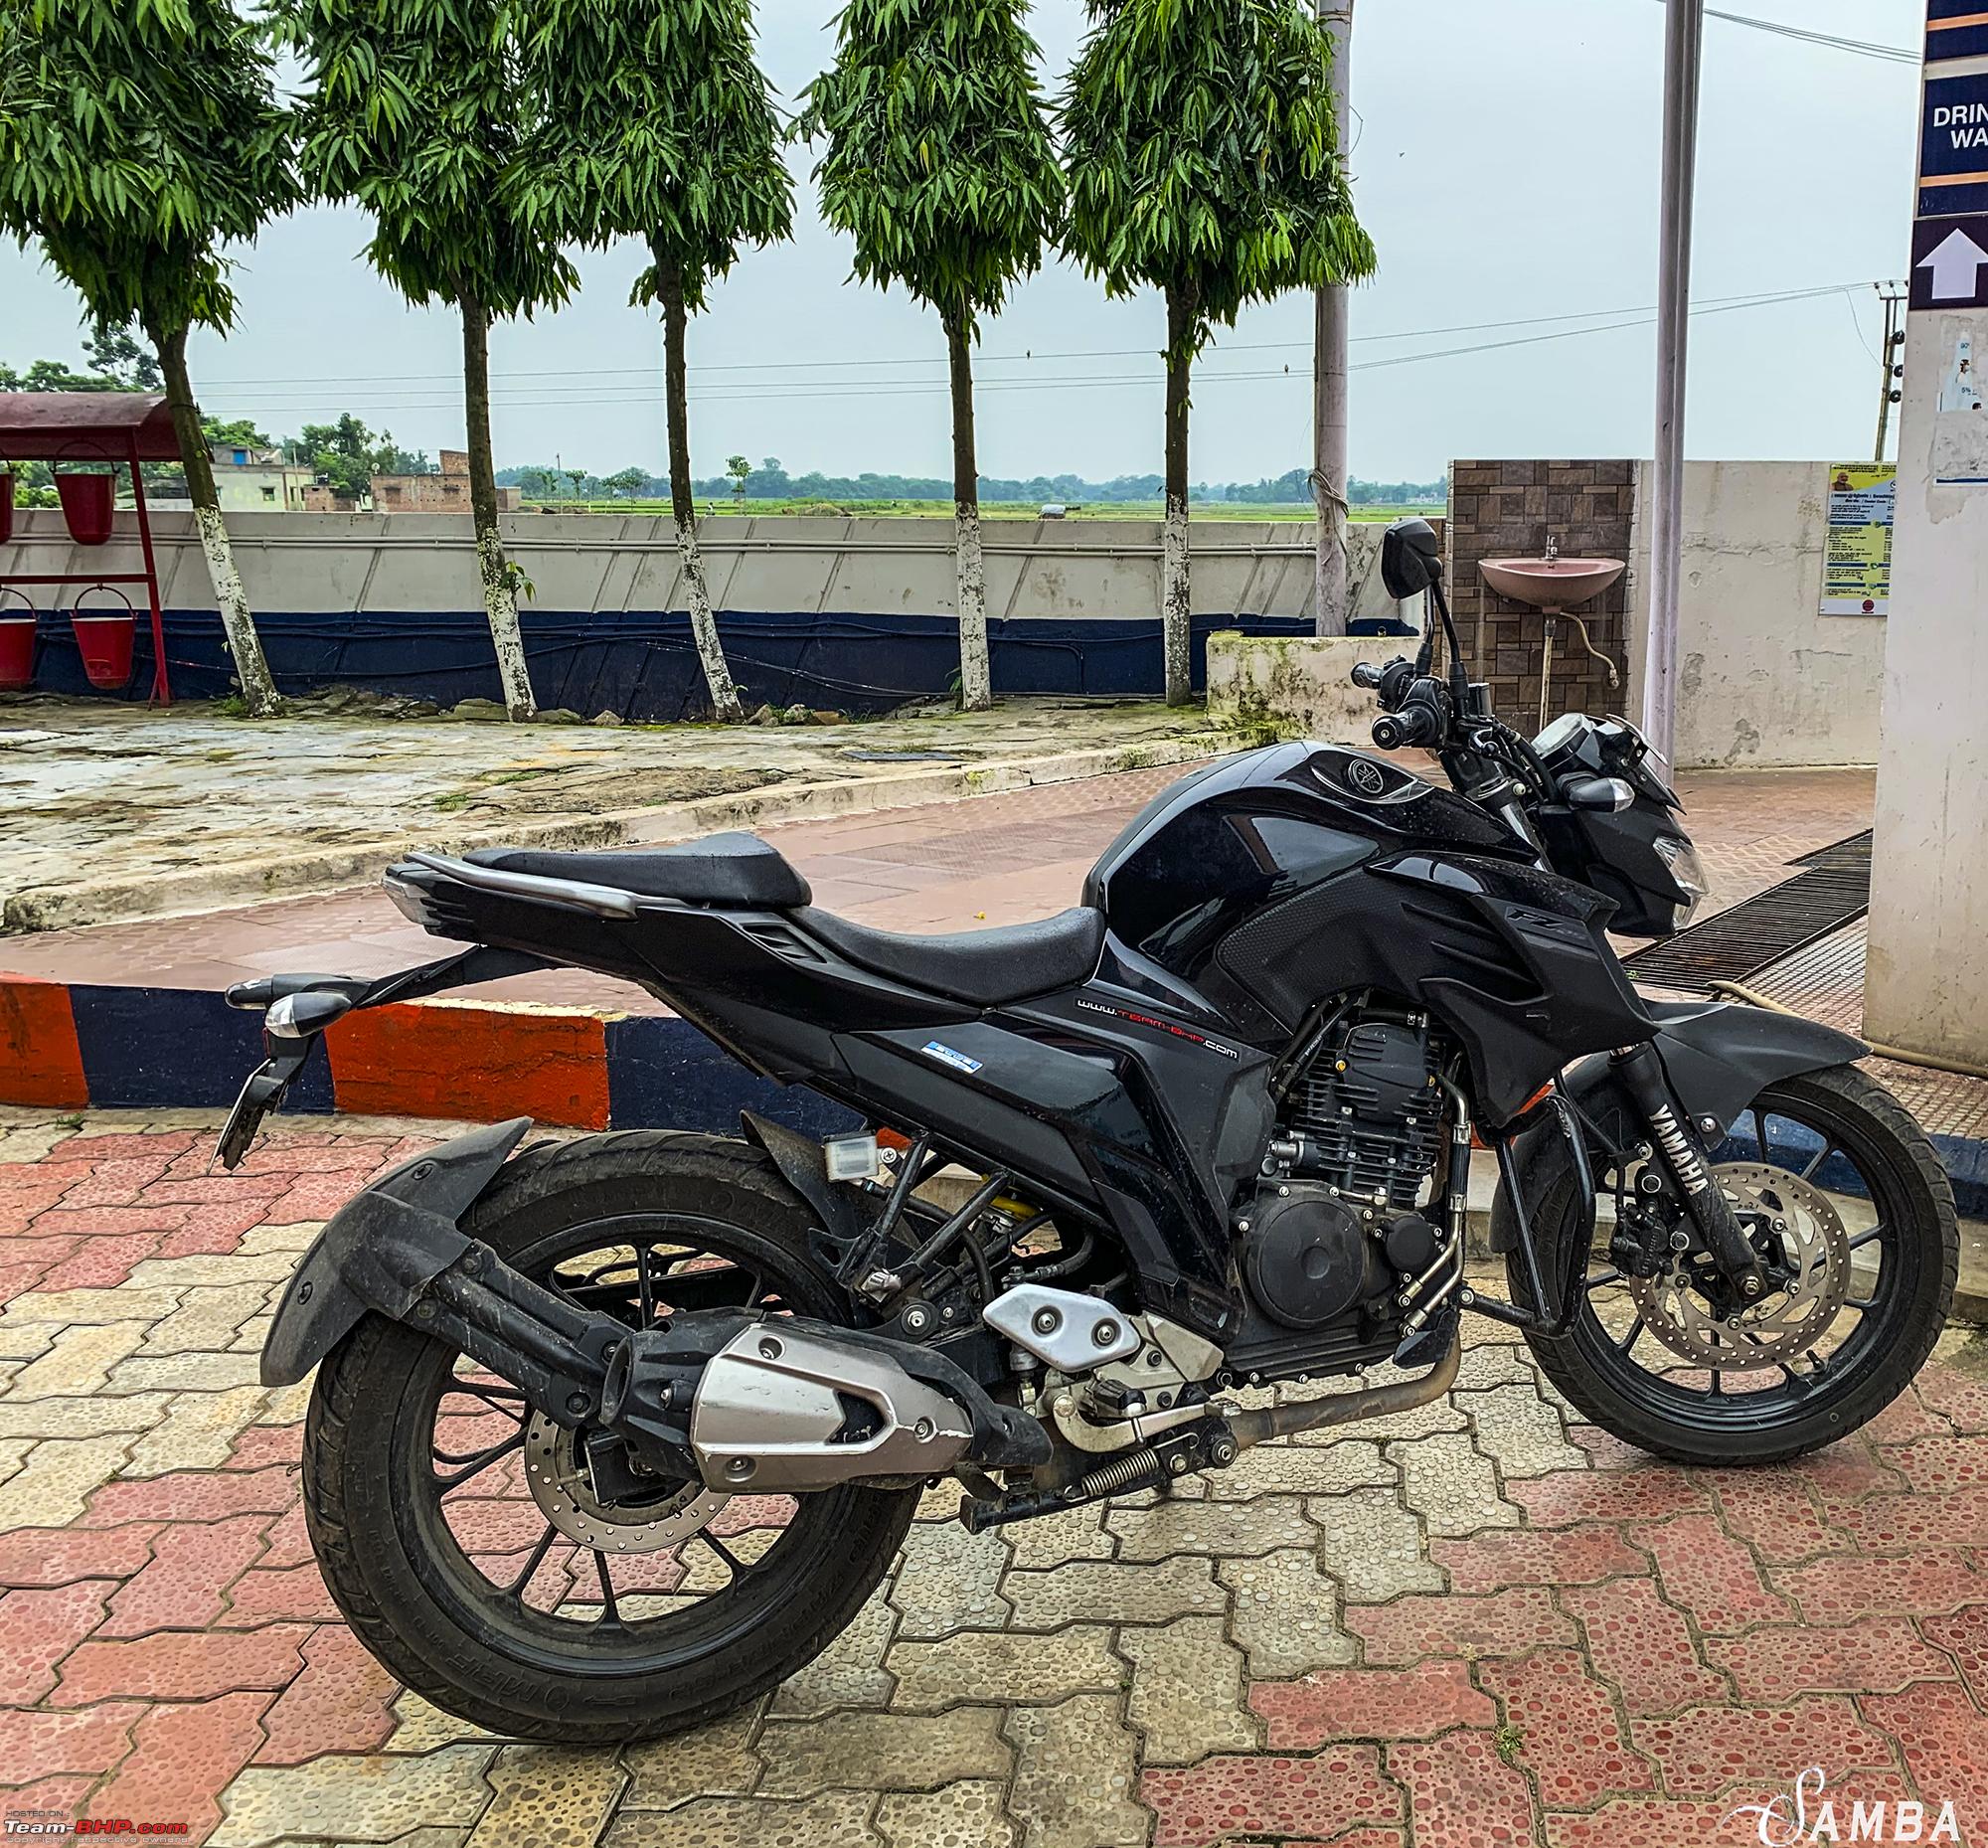 Yamaha FZ25 : An Owner's Point of View - Page 11 - Team-BHP